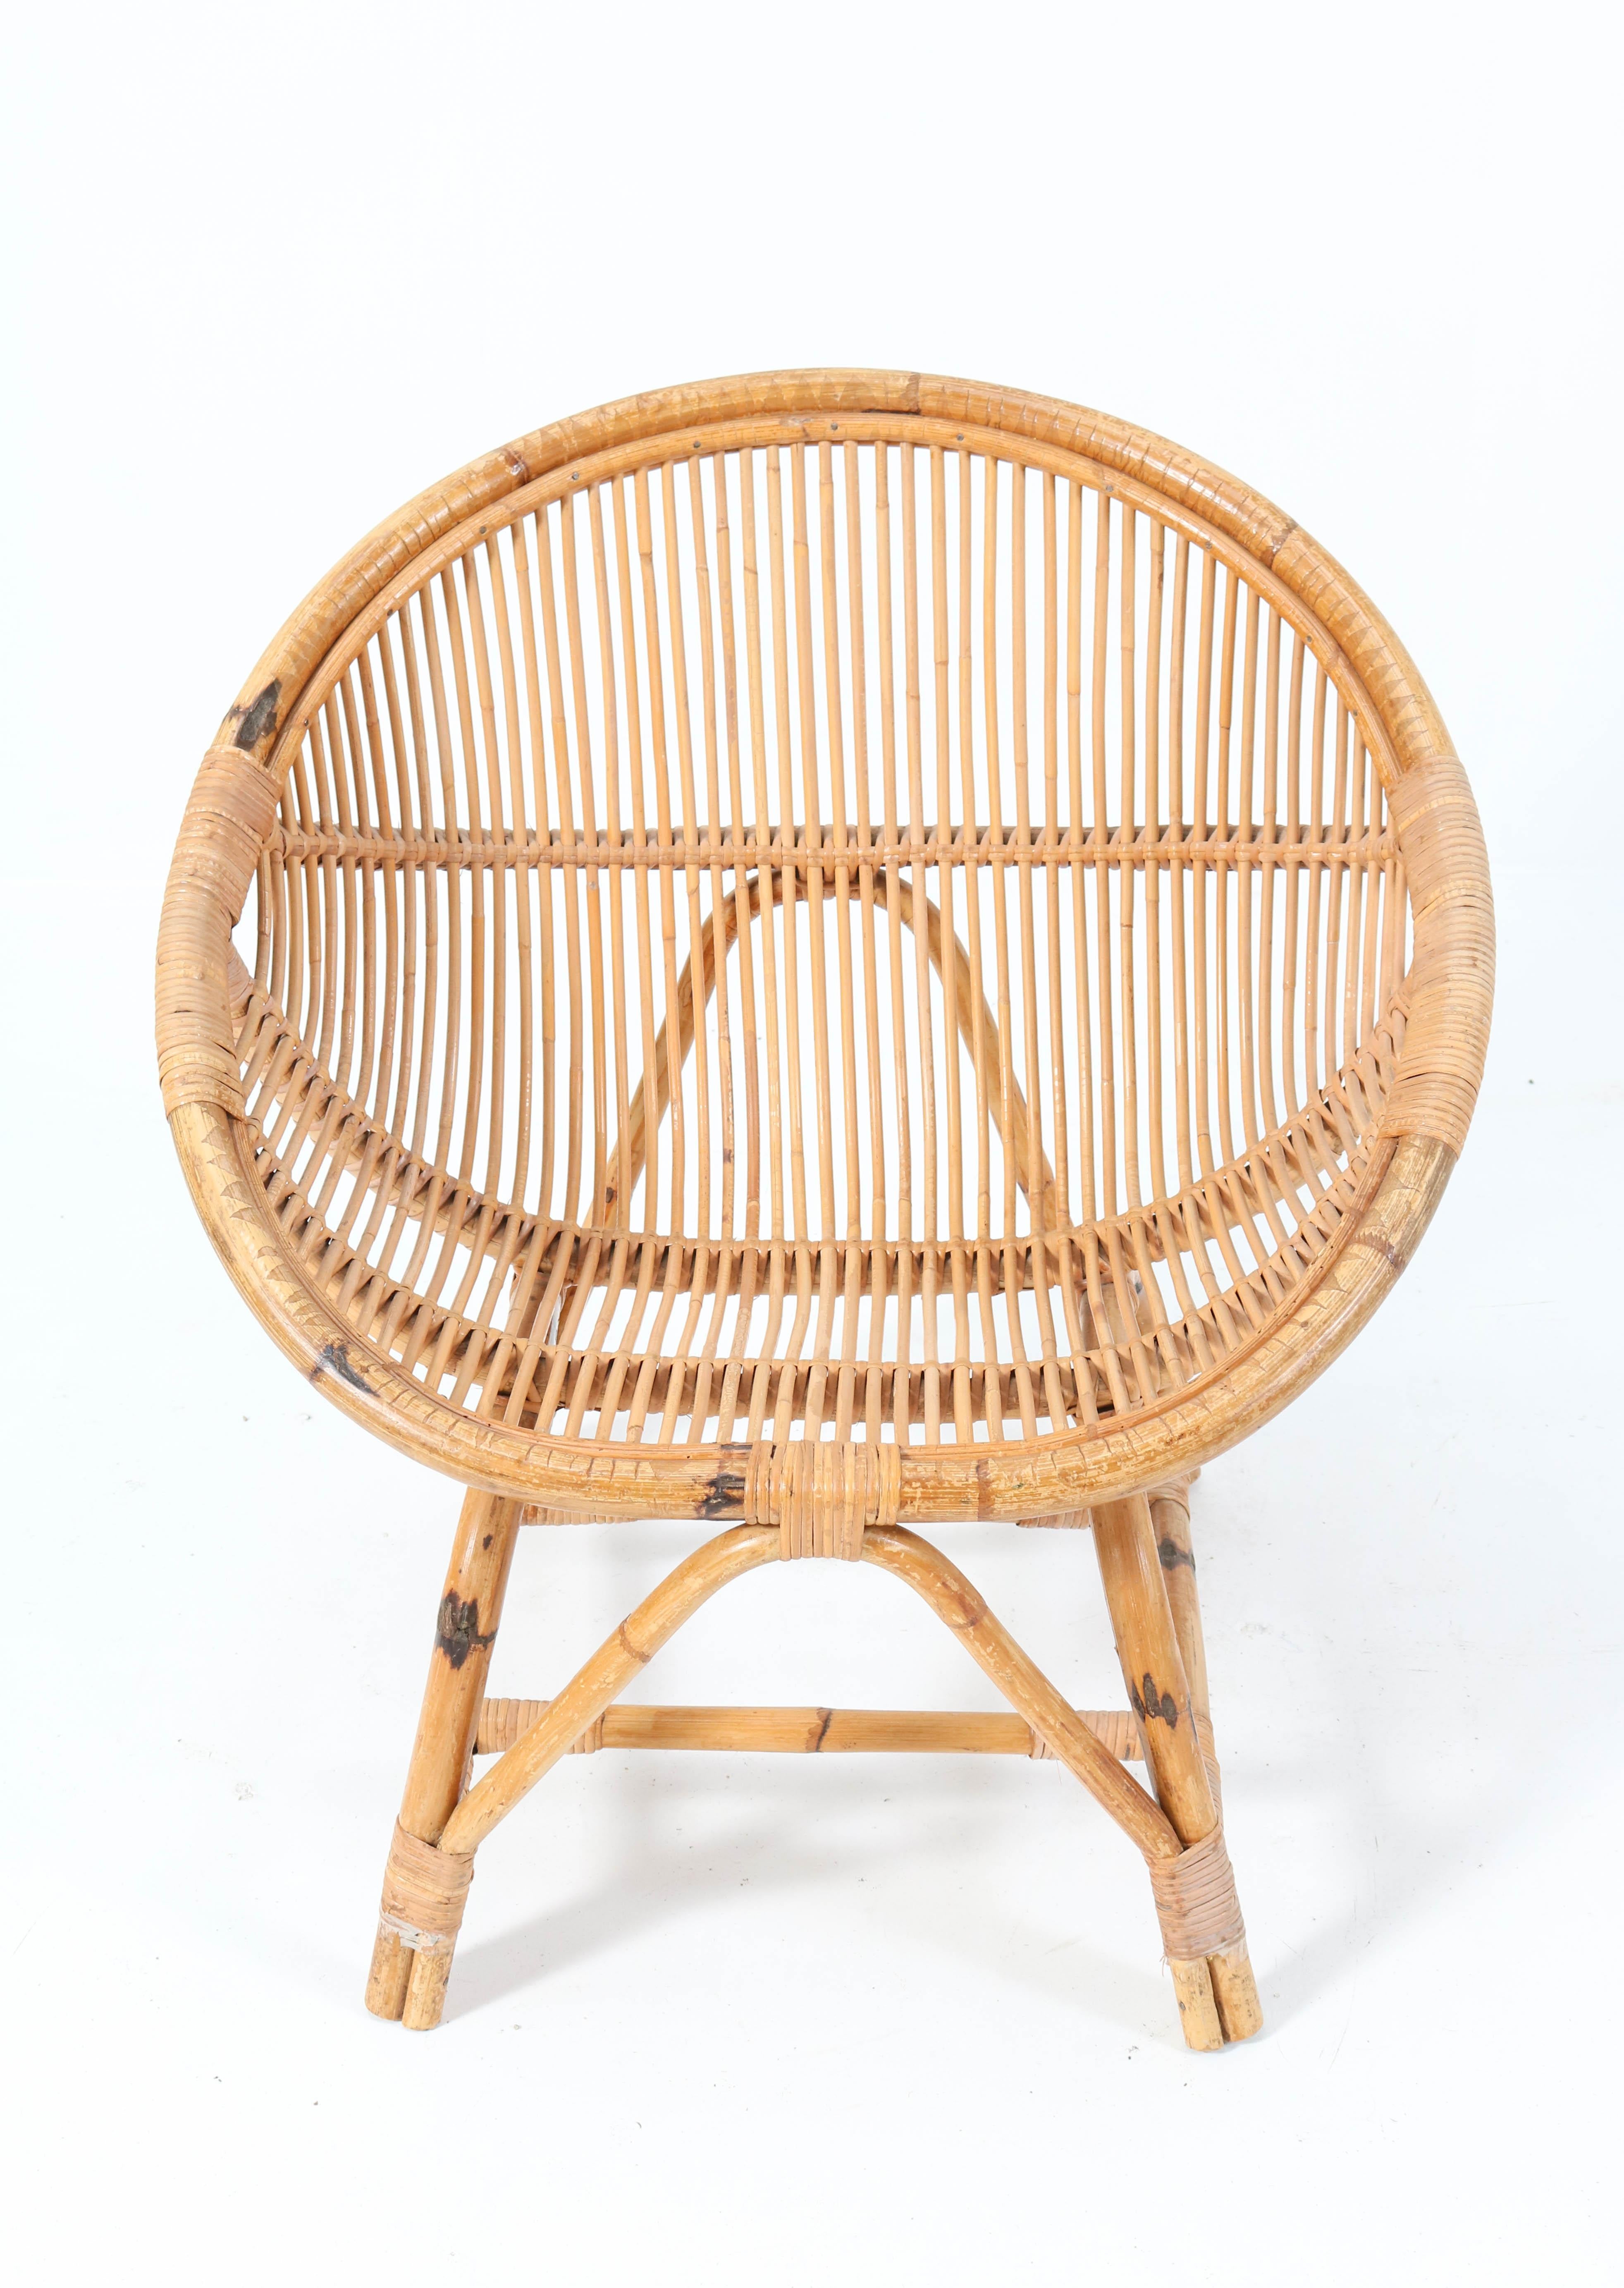 Pair of Mid-Century Modern Bamboo Rattan Lounge Chairs, 1950s 1